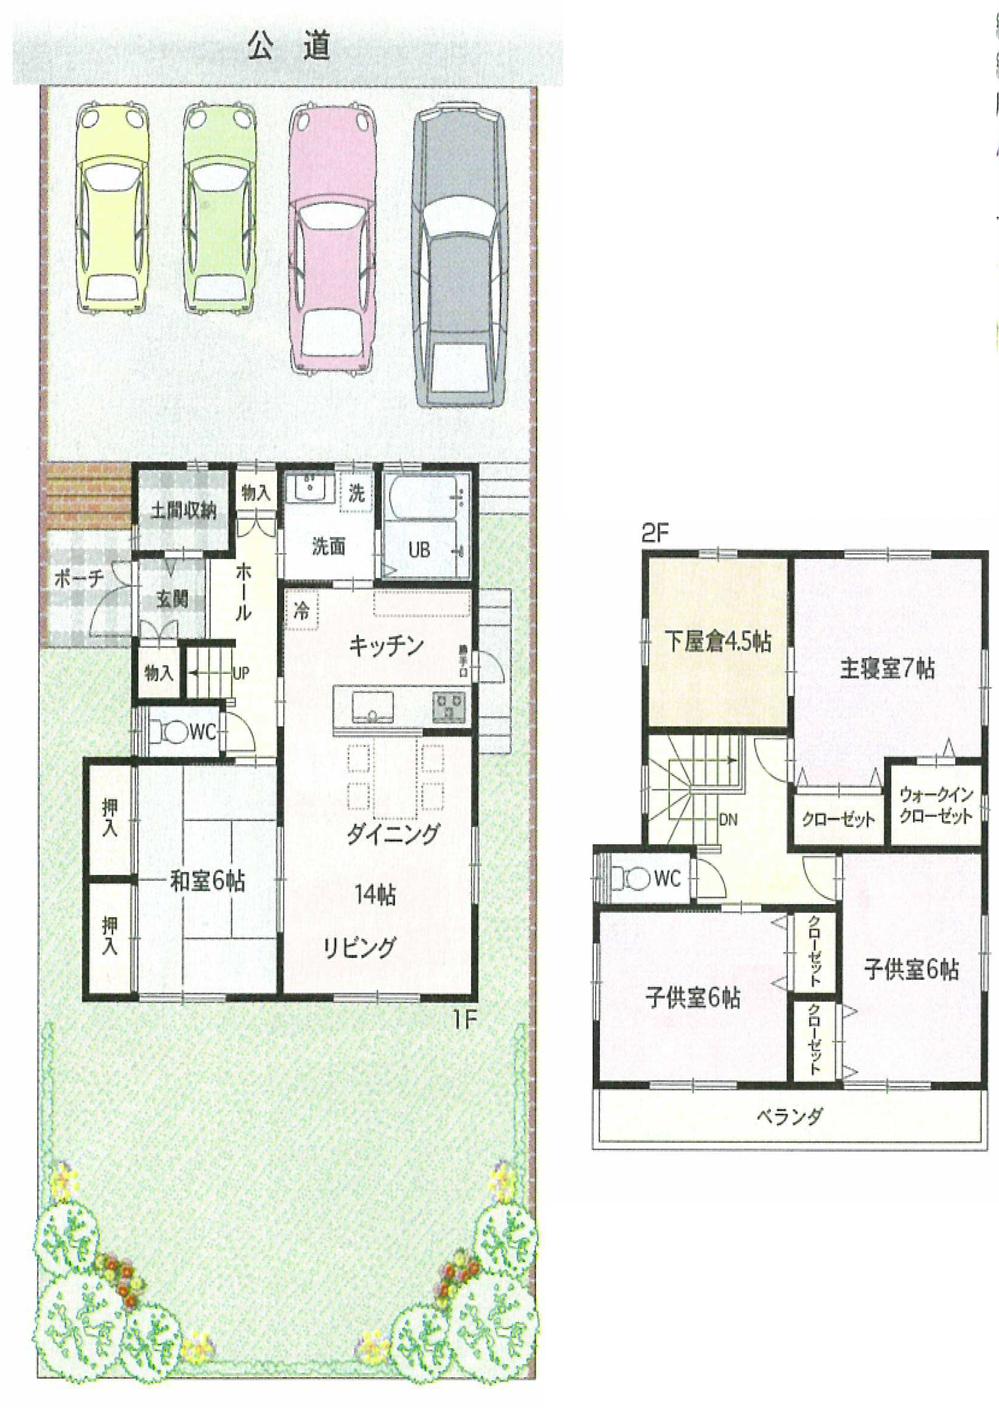 Compartment view + building plan example. Building plan example (north) 4LDK, Land price 10 million yen, Land area 186 sq m , Building price 21 million yen, Building area 105.16 sq m